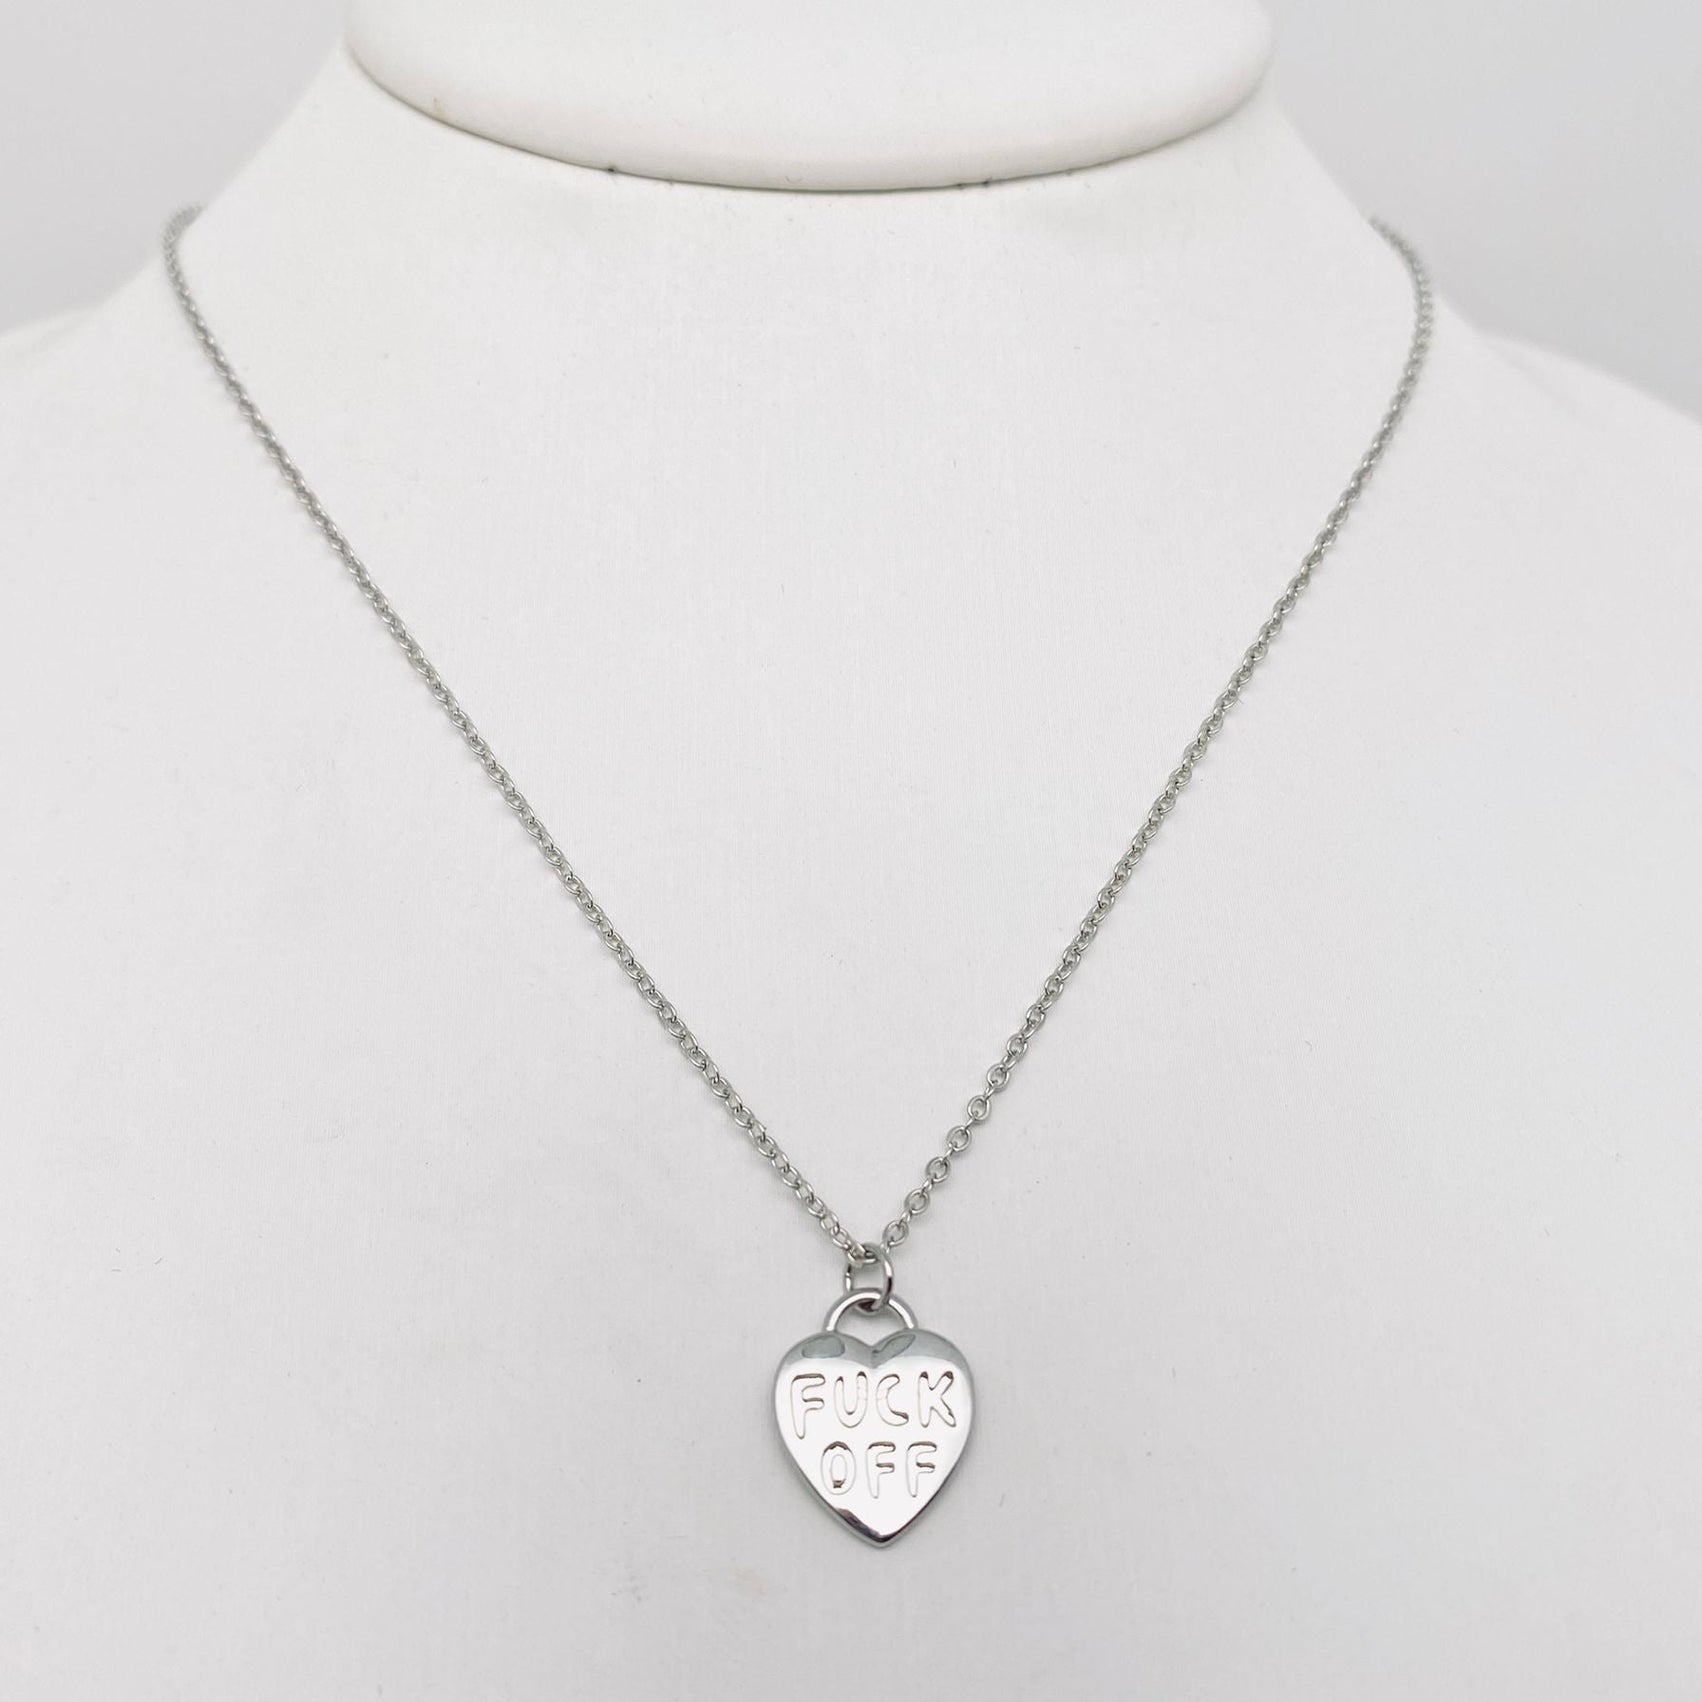 Heart-shaped pendant in silver metal engraved with “FUCK OFF” on a matching link style chain 